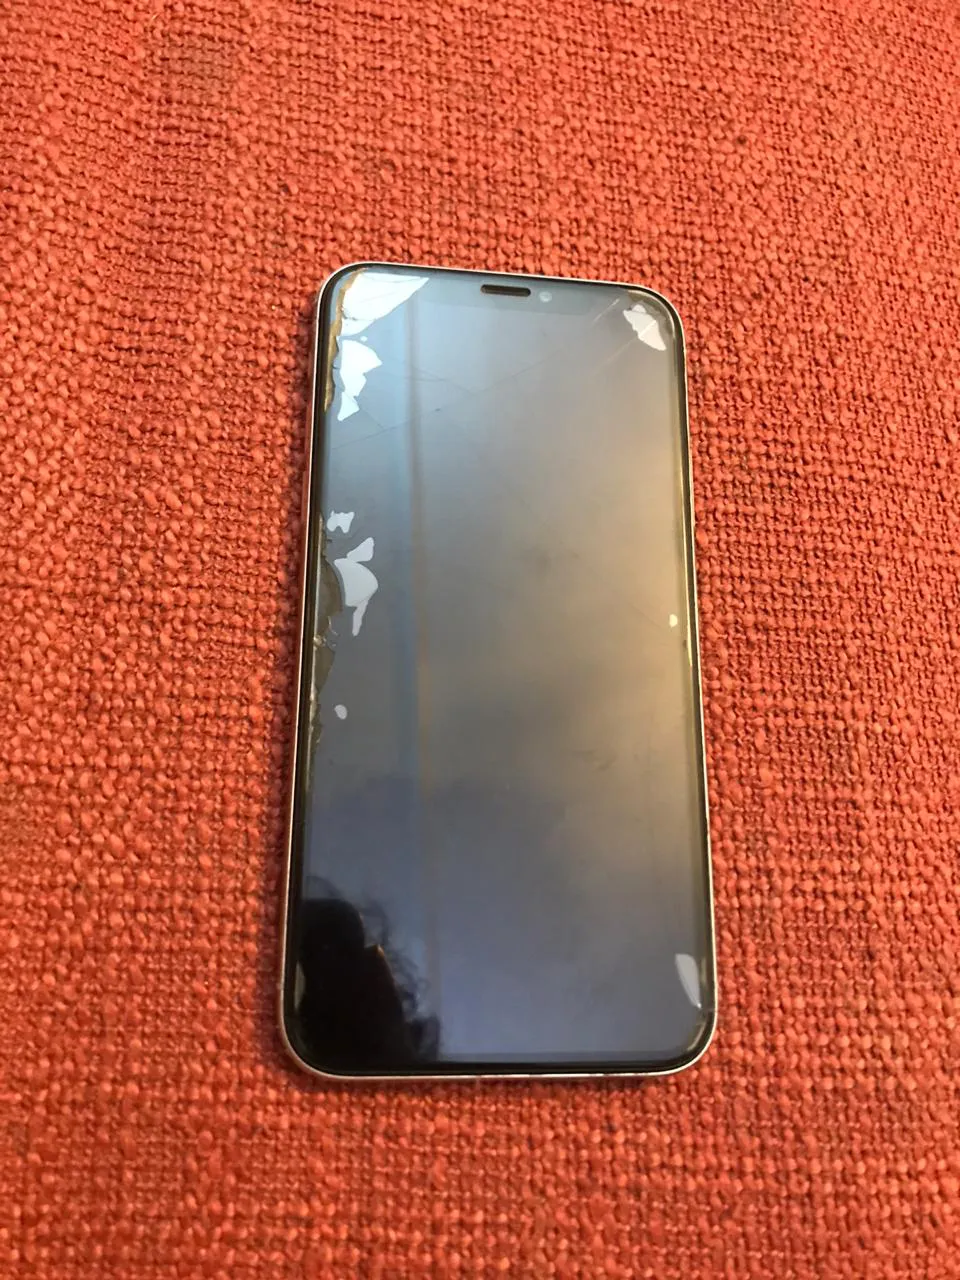 iPhone X 64GB for sale - photo 1